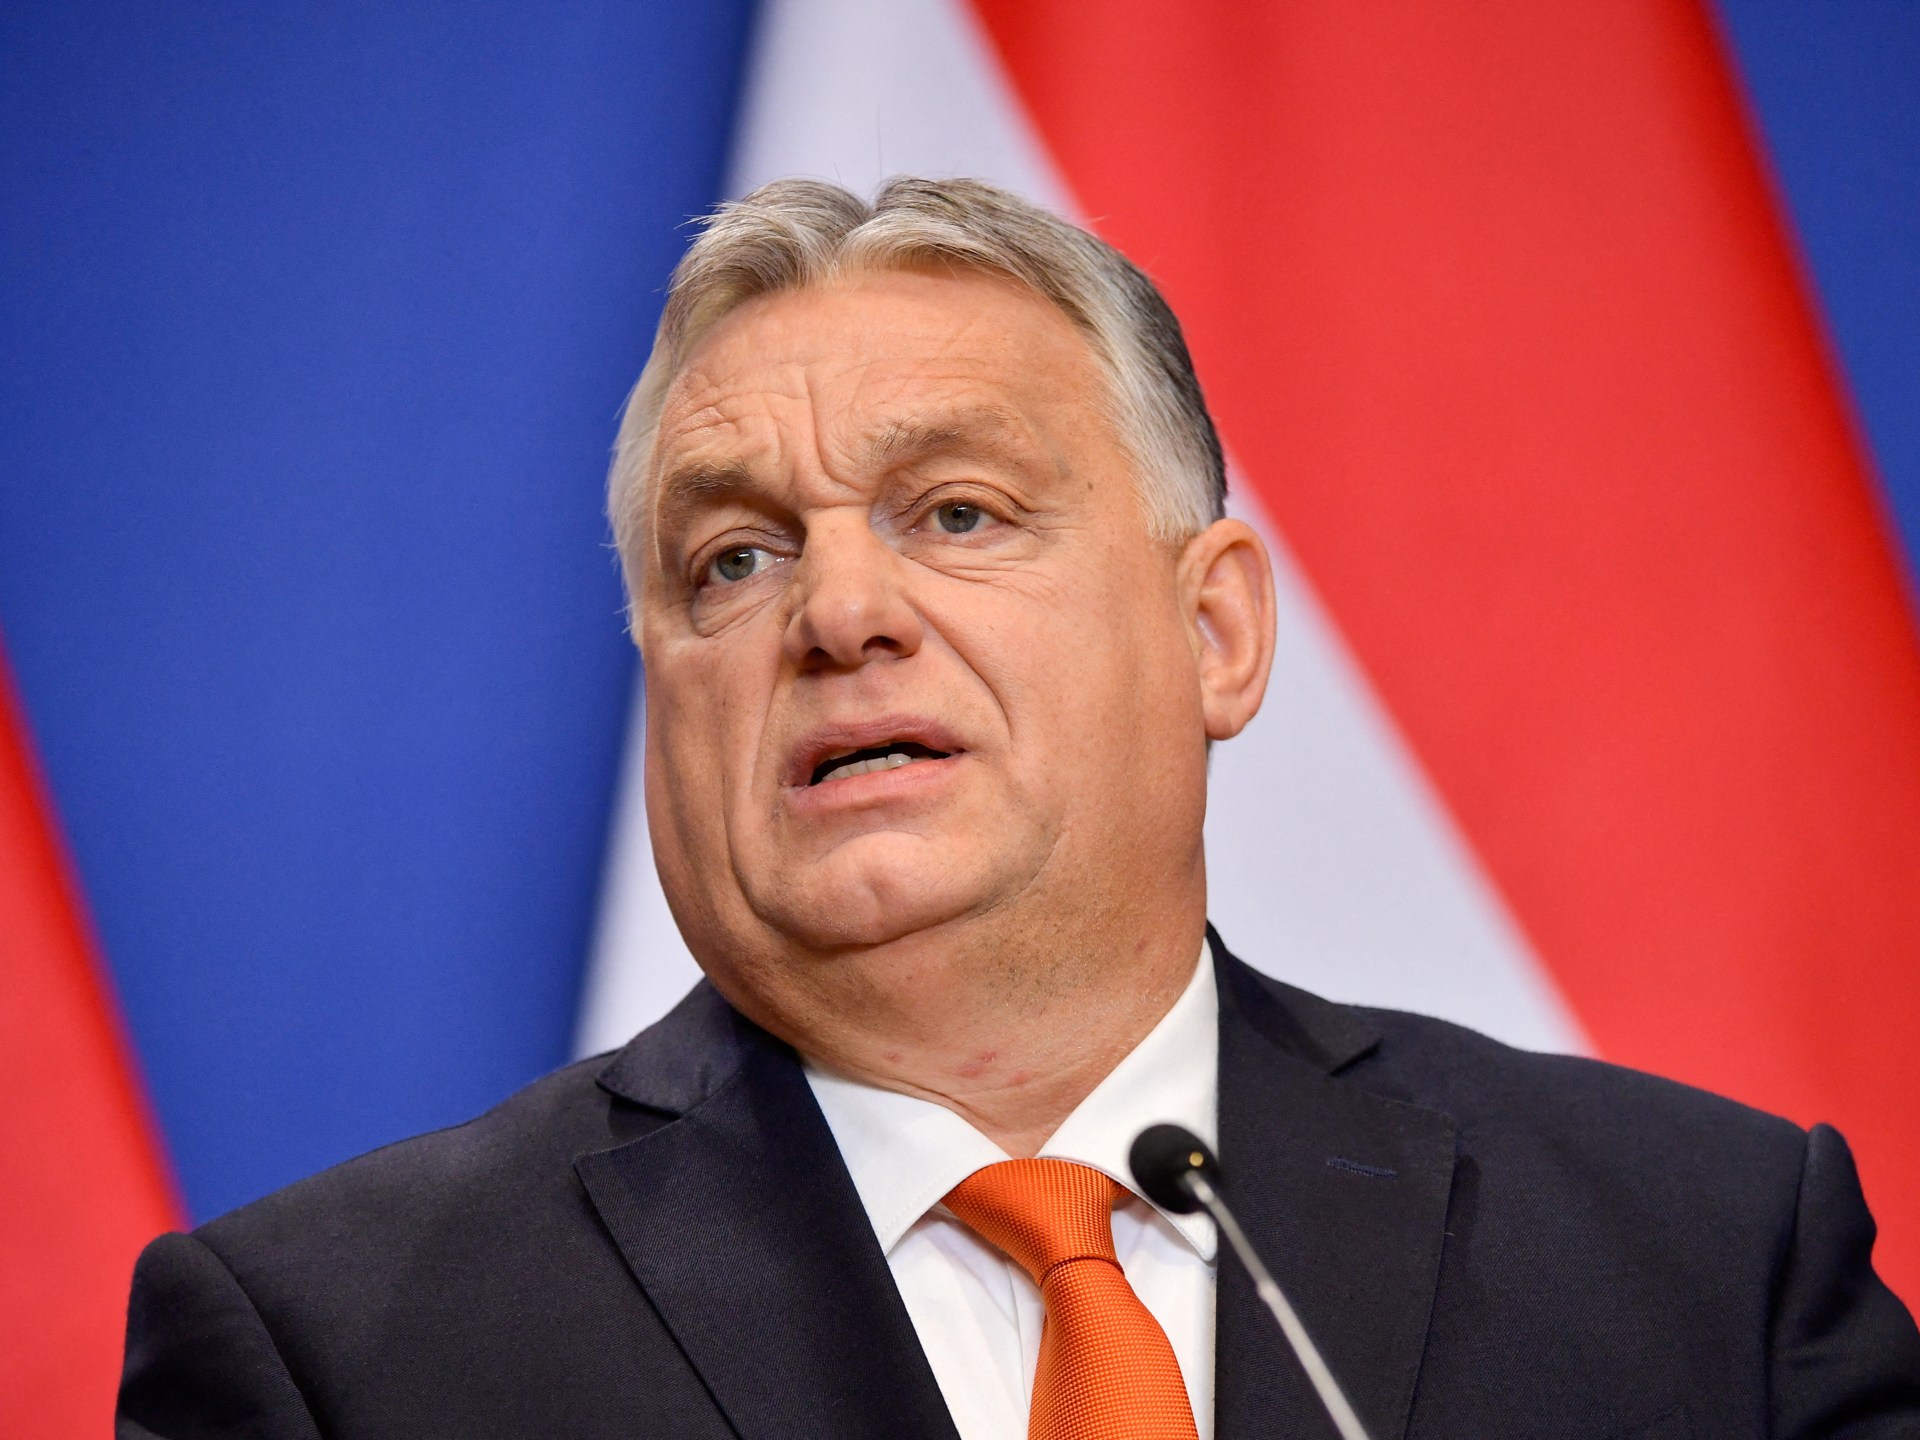 Hungary’s hostage diplomacy: PM Orban frees human traffickers